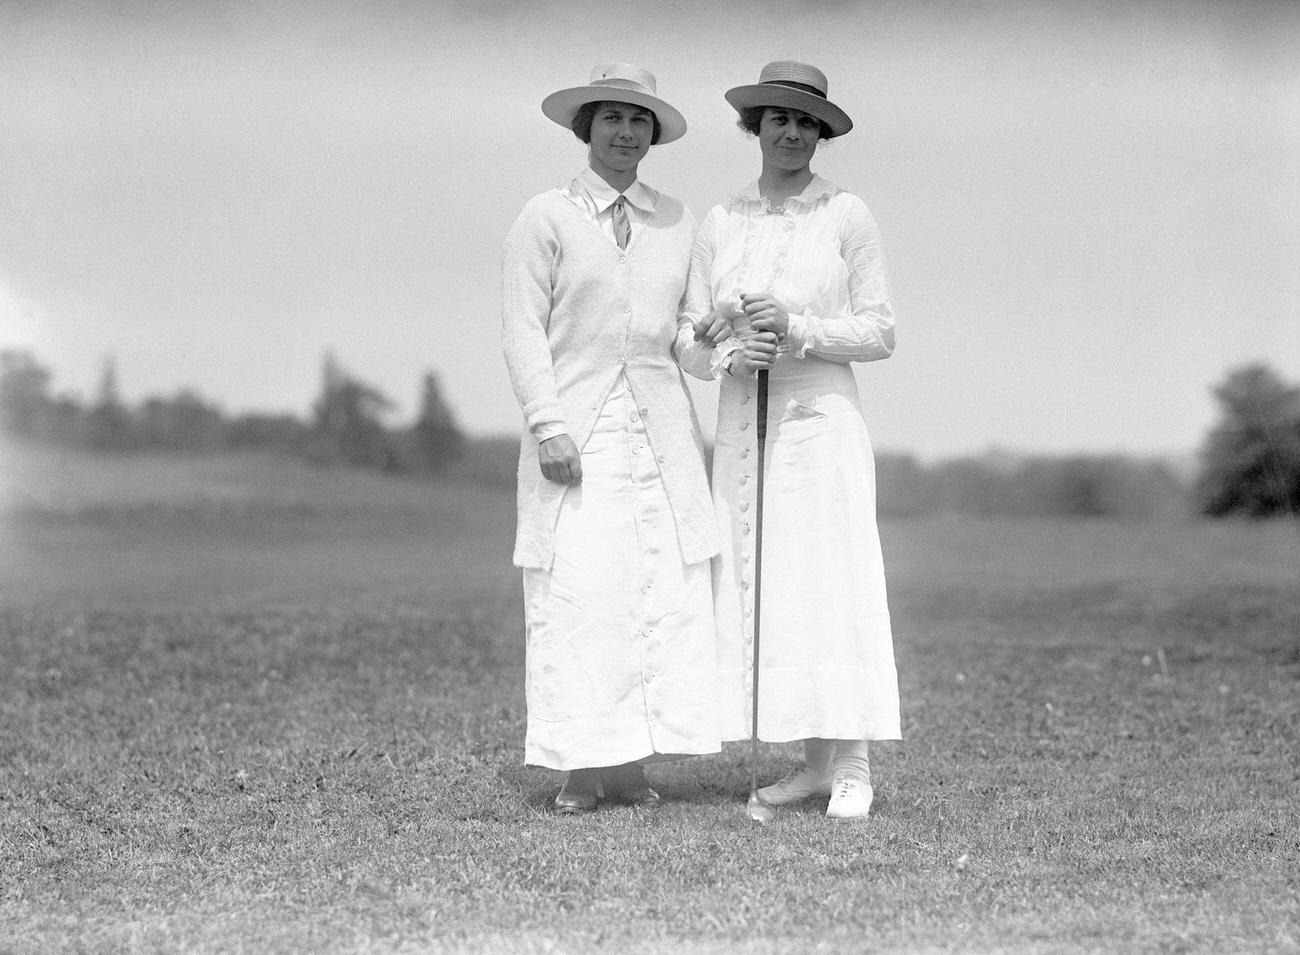 Mrs. Lillian Hyde and Marion Hollins at Women's Metropolitan Golf Championship, Sleepy Hollow Country Club.